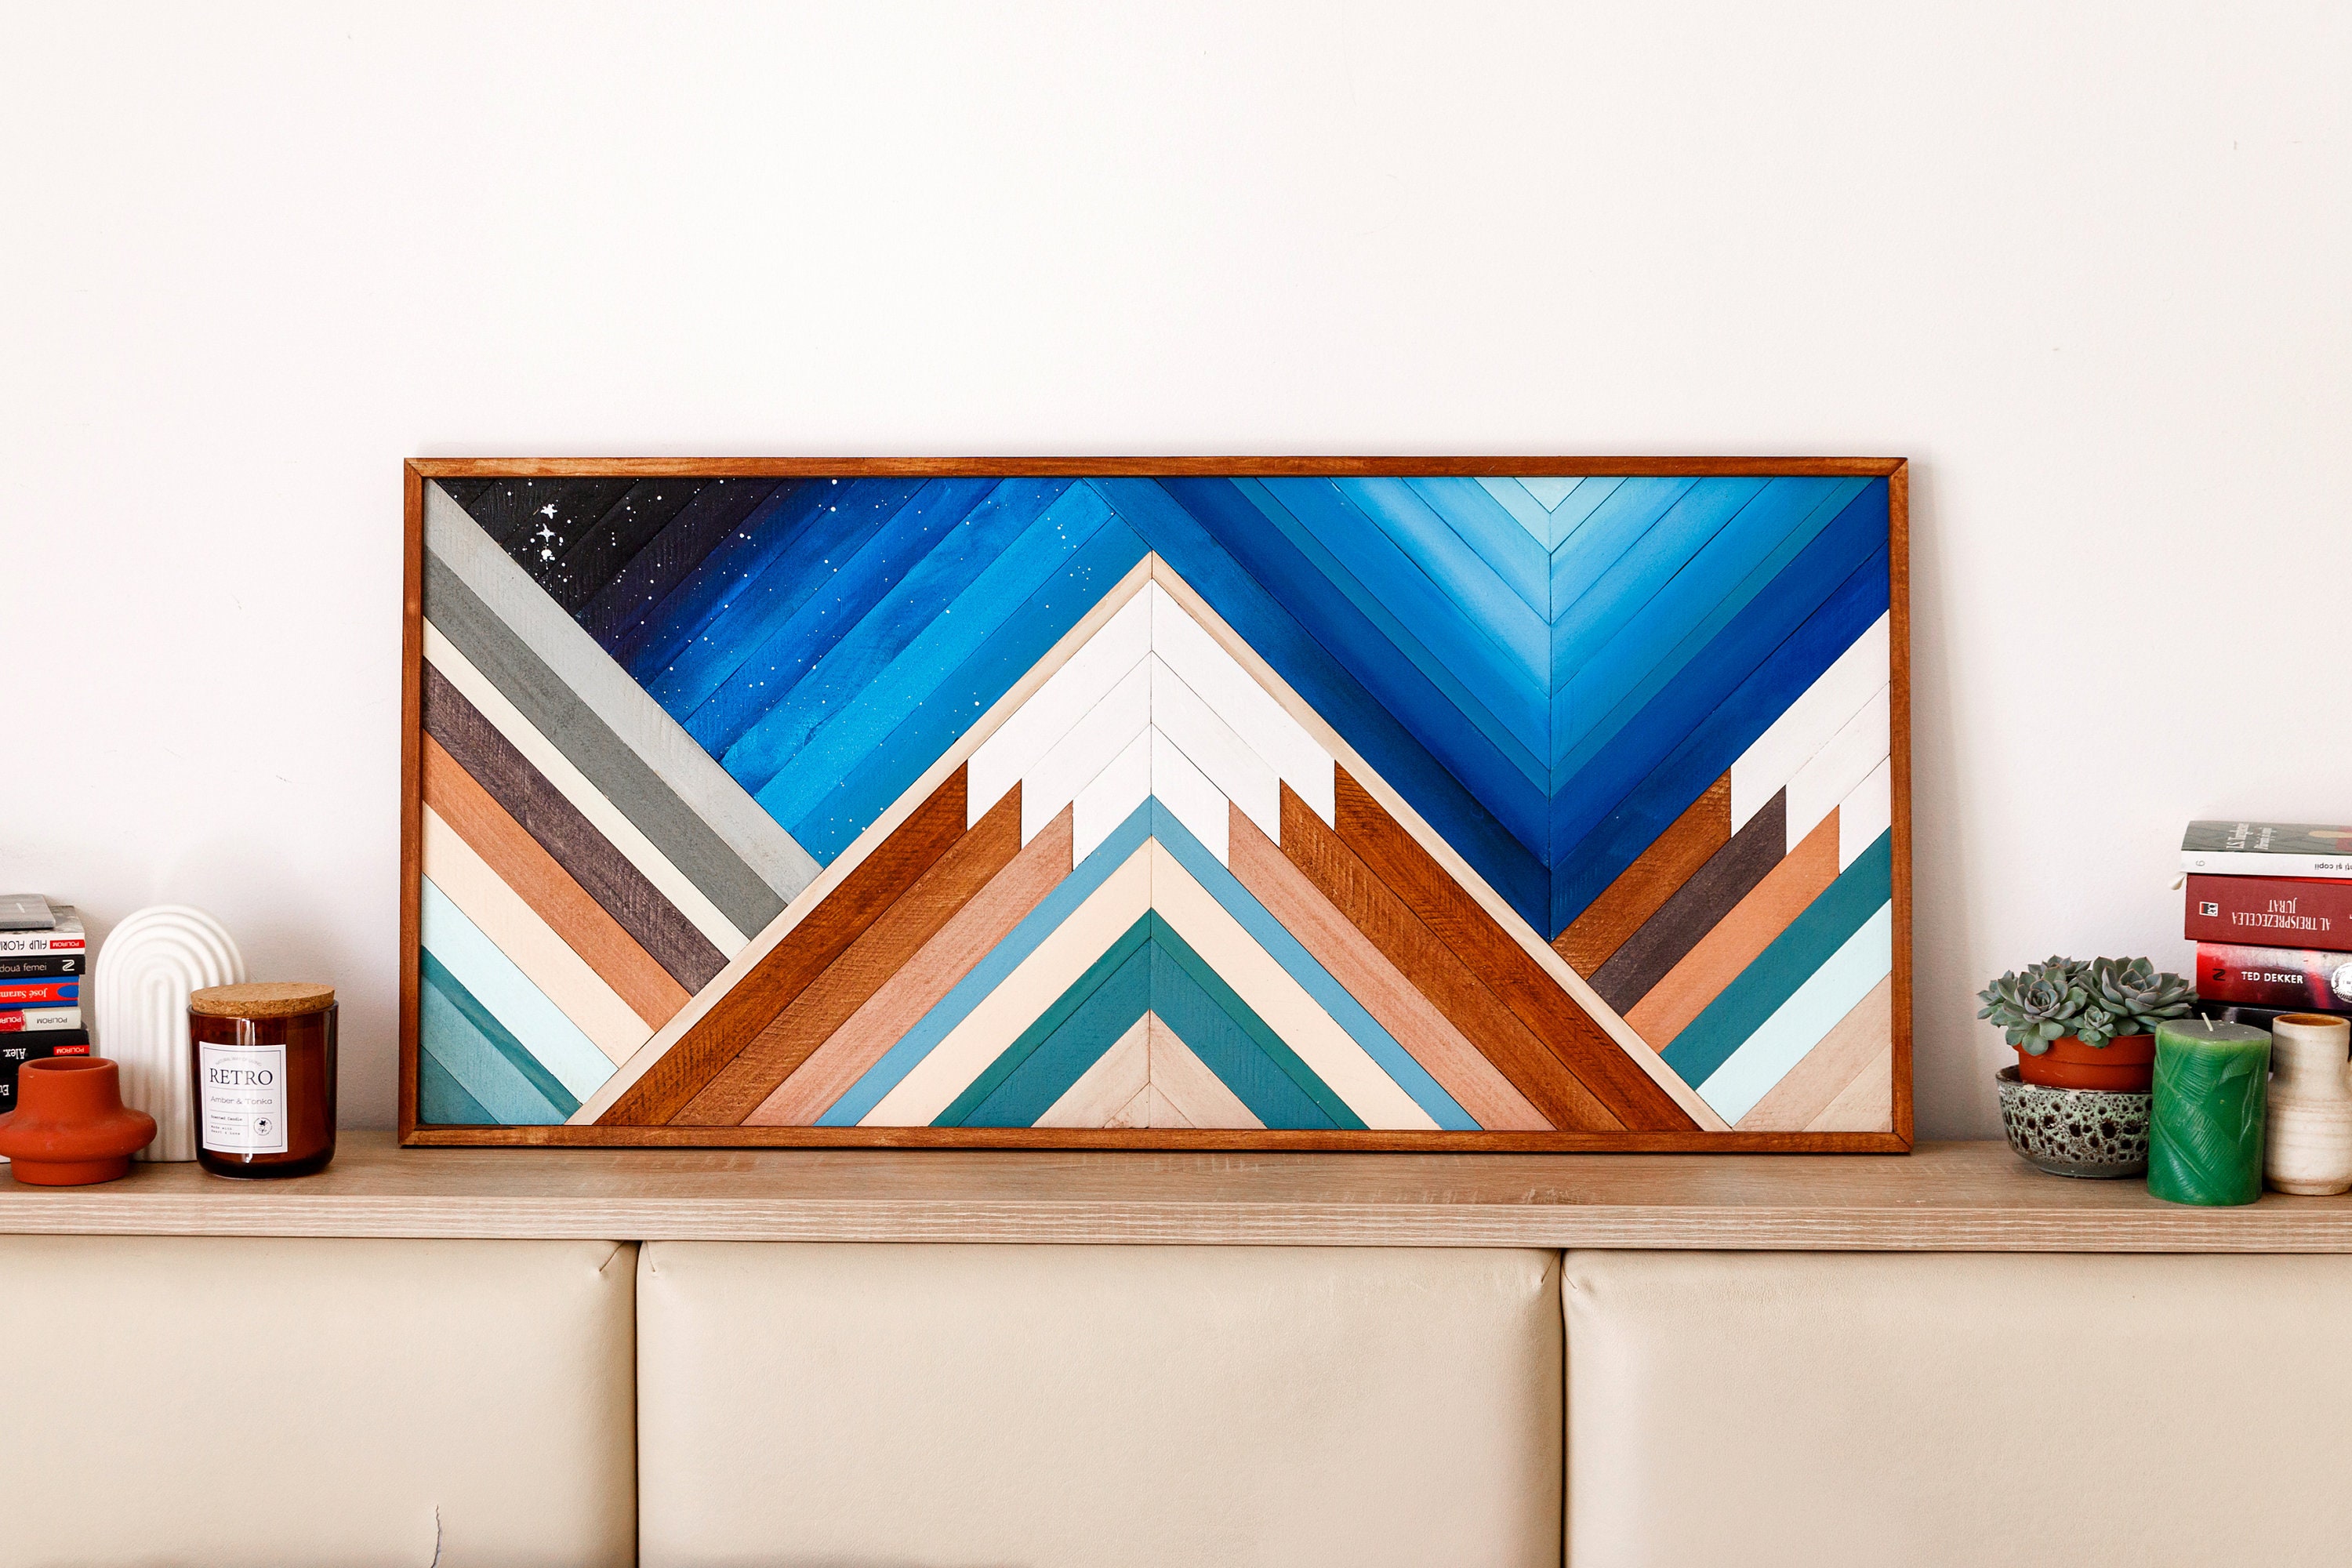 Buy MOUNTAIN WOOD ART, Mountain Sunset Mountain Etsy in Online Art, Capped Landscape, Livingroom - Snow Wood Wood Mountain Geometric India Plaque, Hanging, Wall Decor